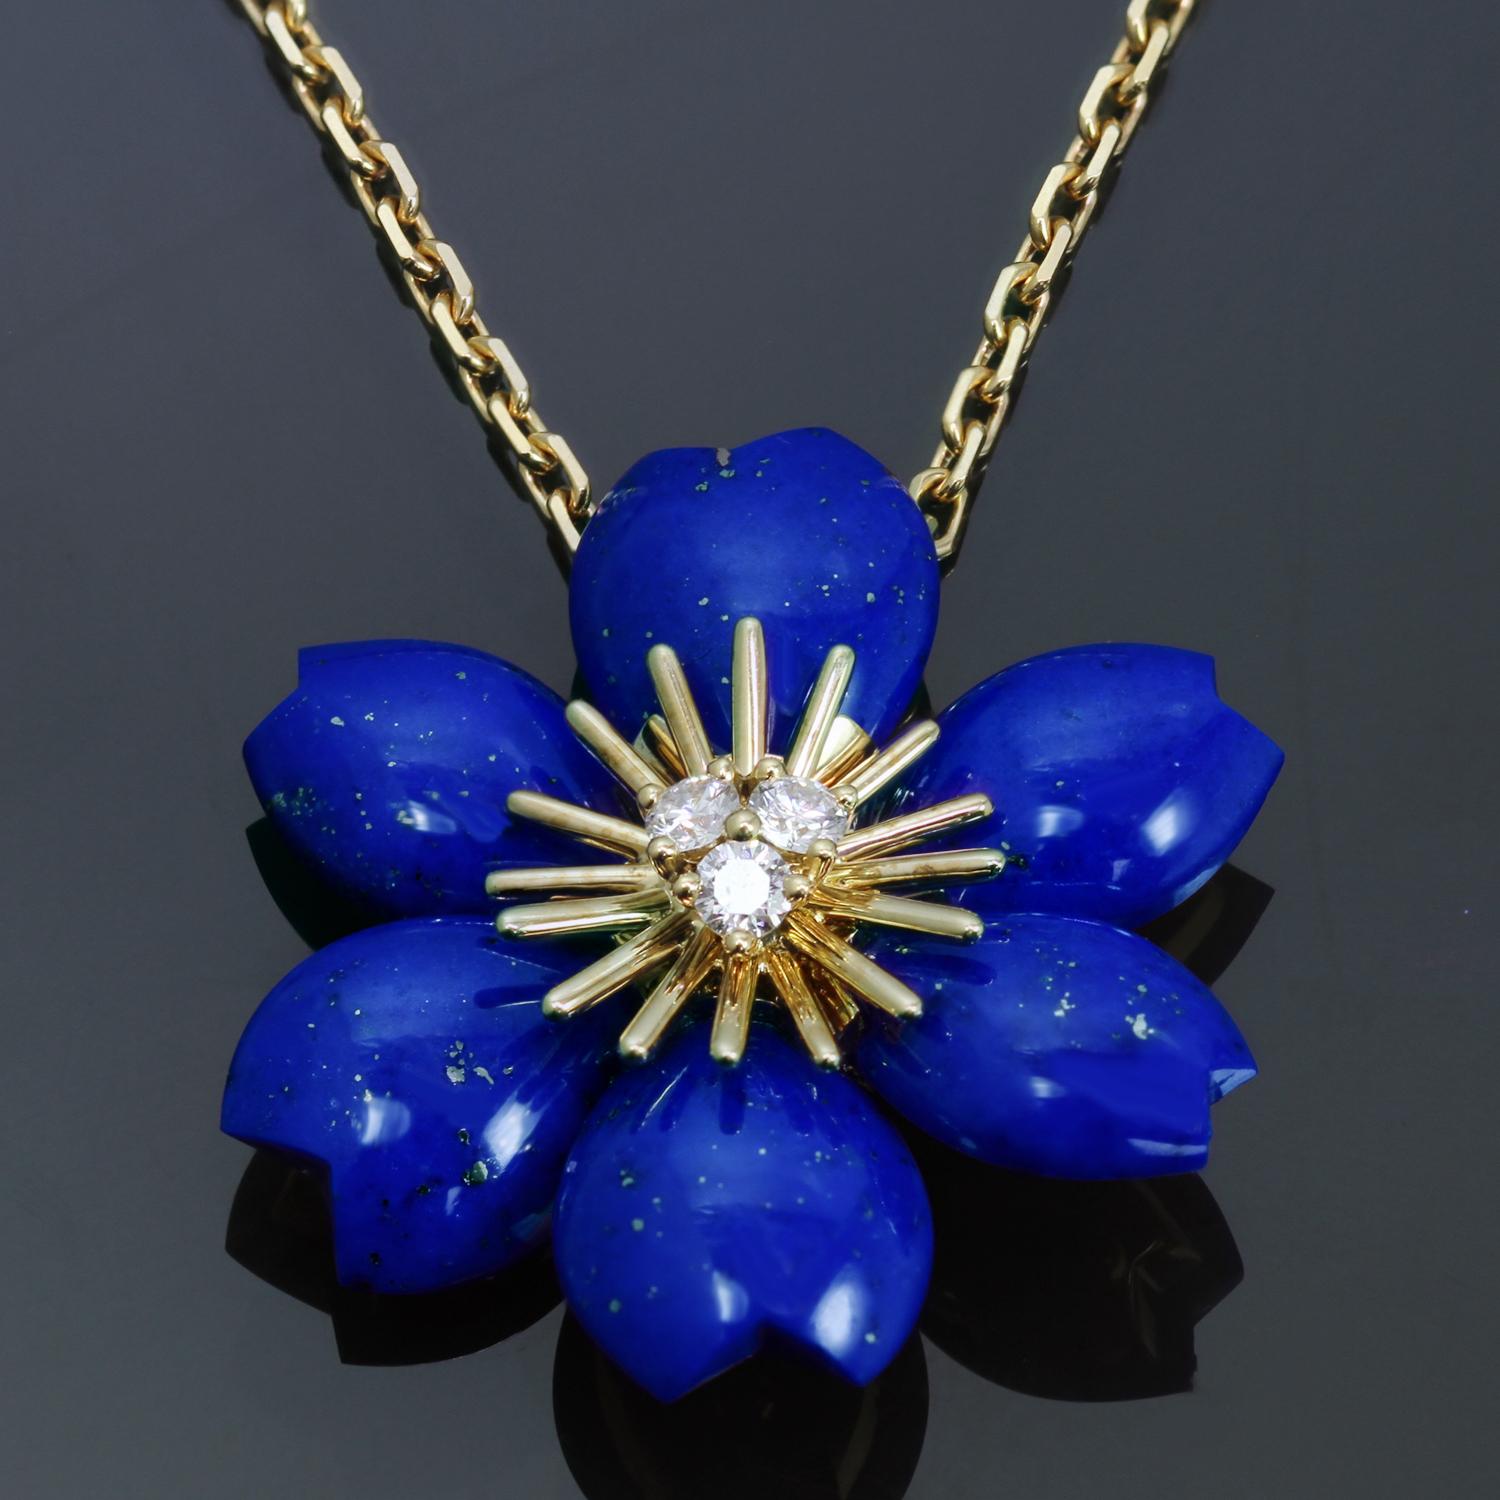 This stunning necklace from the iconic Rose De Noel collection by Van Cleef & Arpels is crafted in 18k yellow gold and features flower pendant composed of blue lapis lazuli petals and sparkling centers prong-set with brilliant-cut round D-E-F